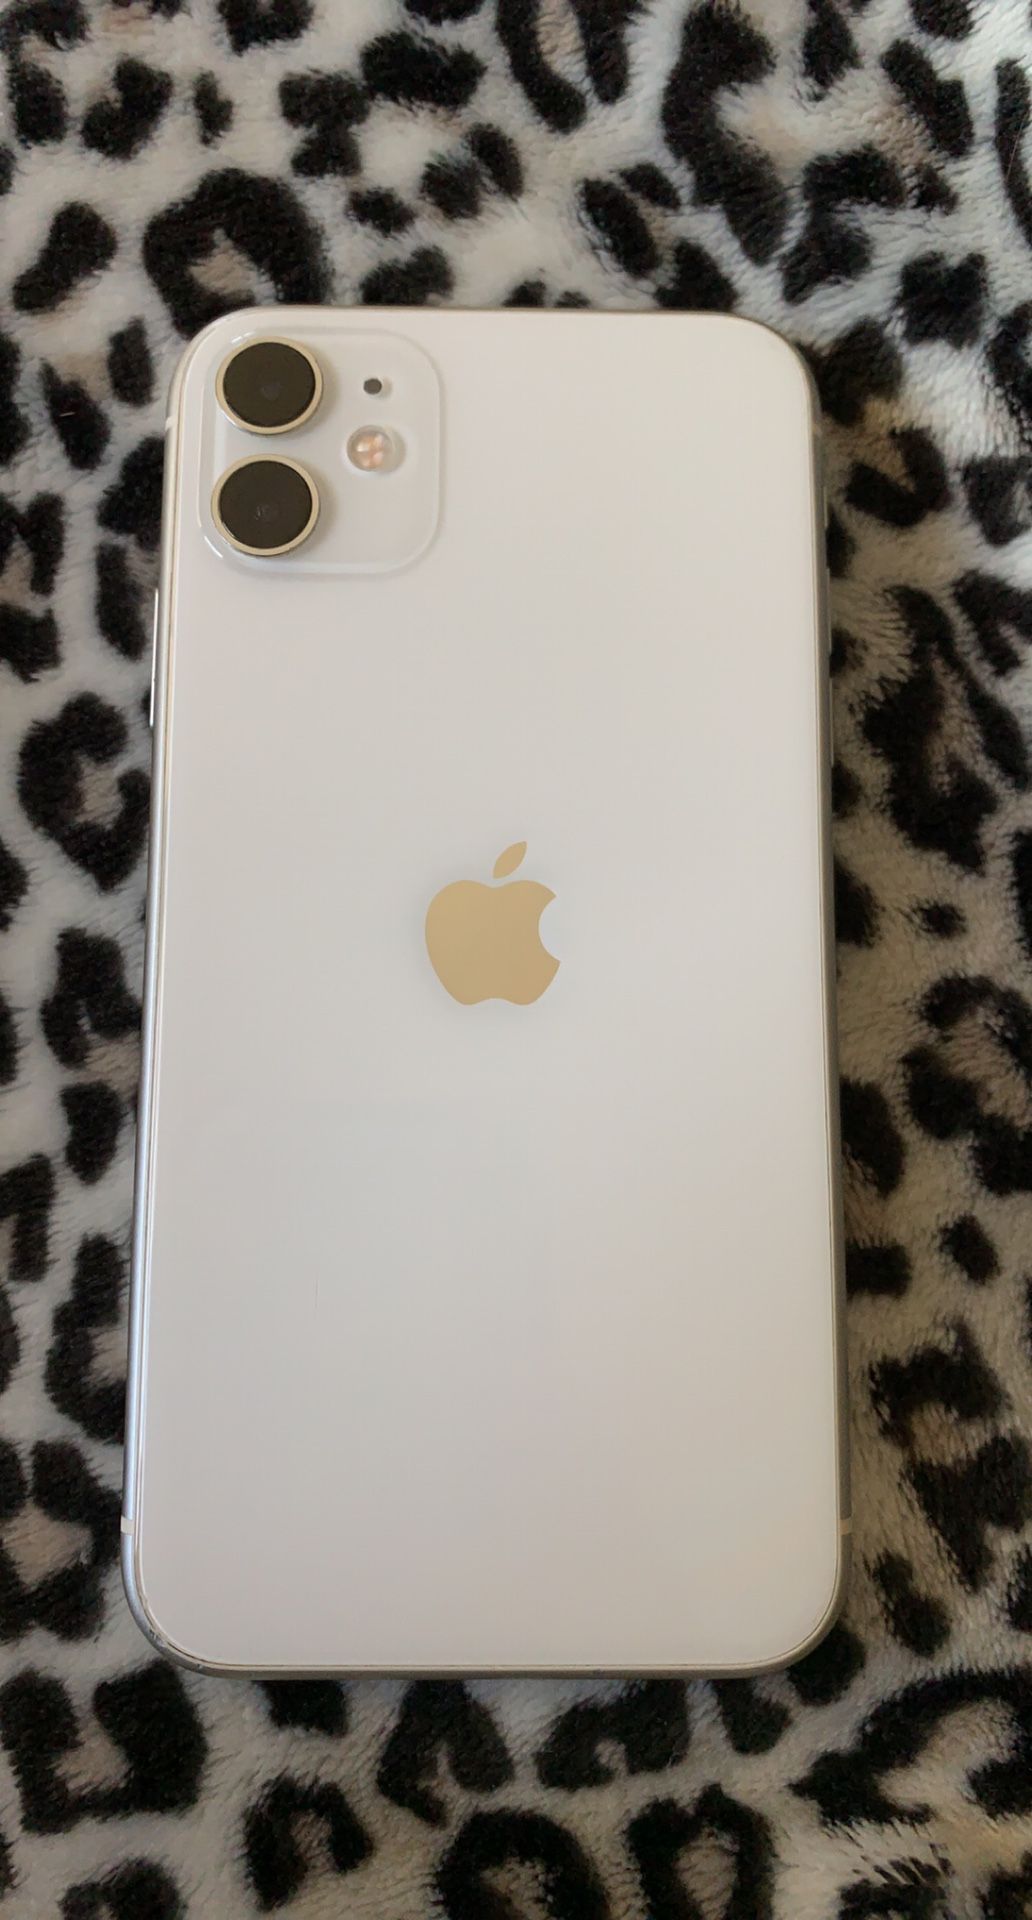 AT&T Apple iPhone 11 128GB white